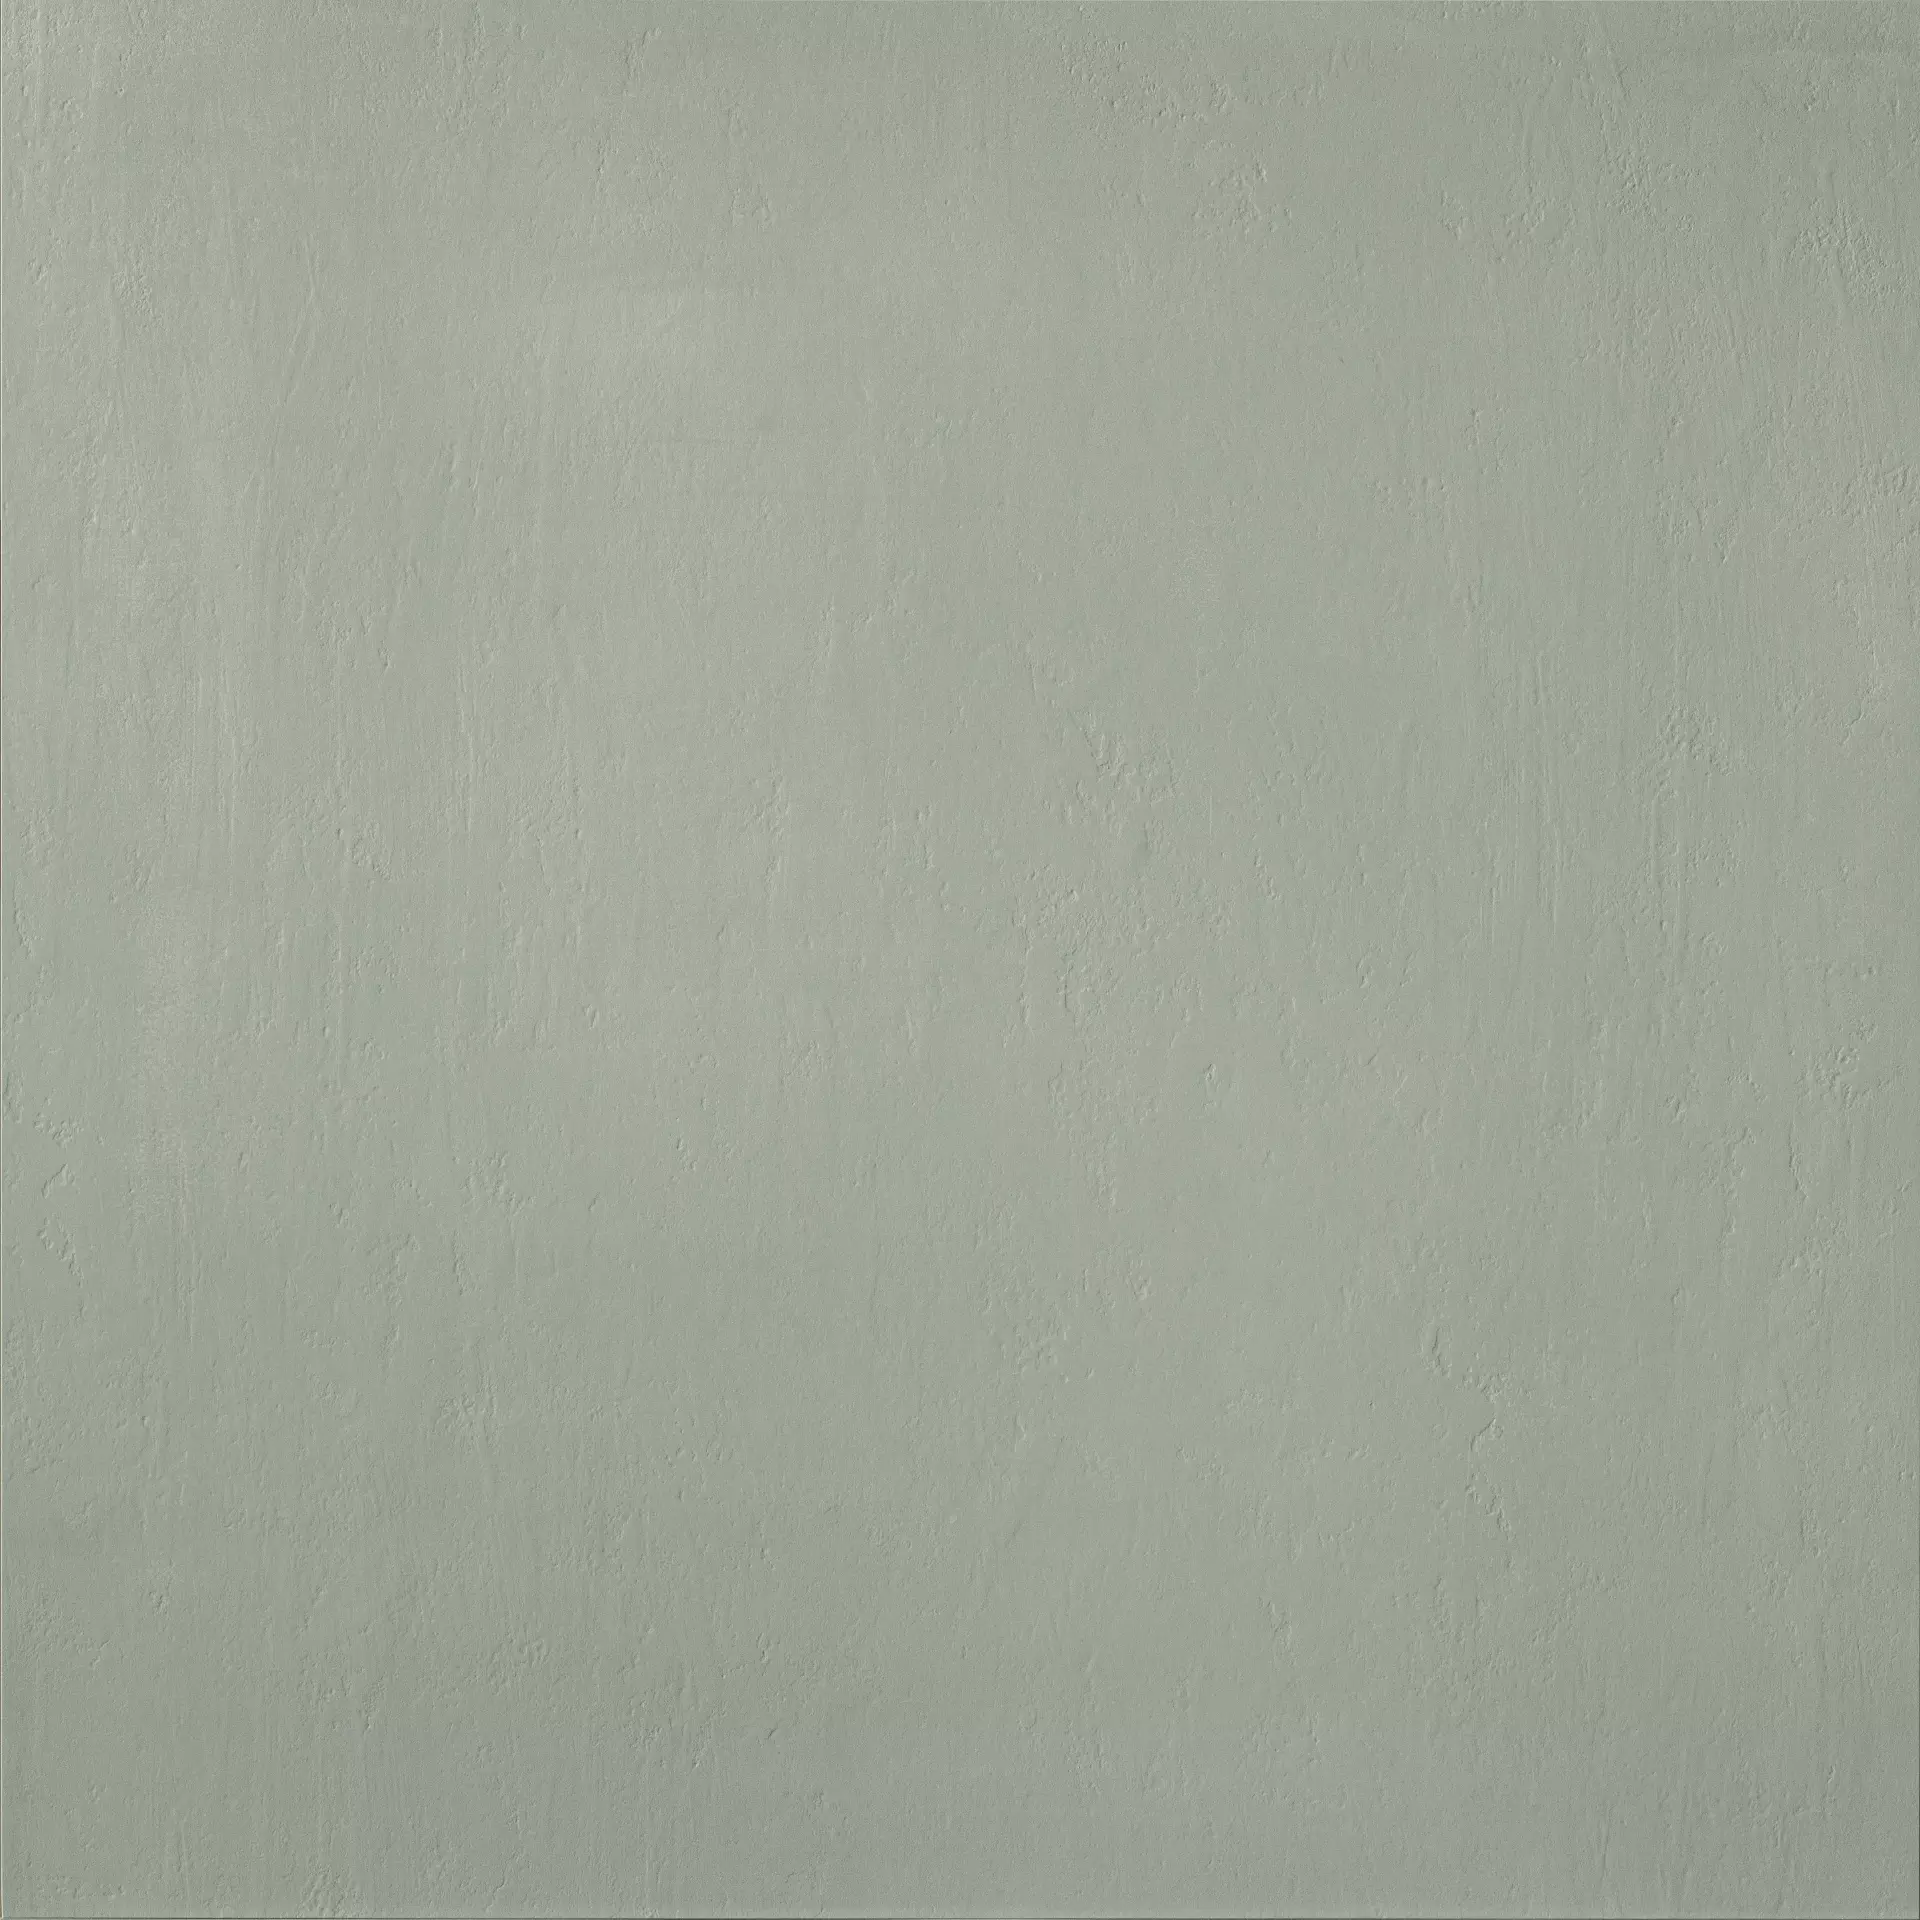 Cercom To Be Grigio Naturale 1061435 100x100cm rectified 8,5mm